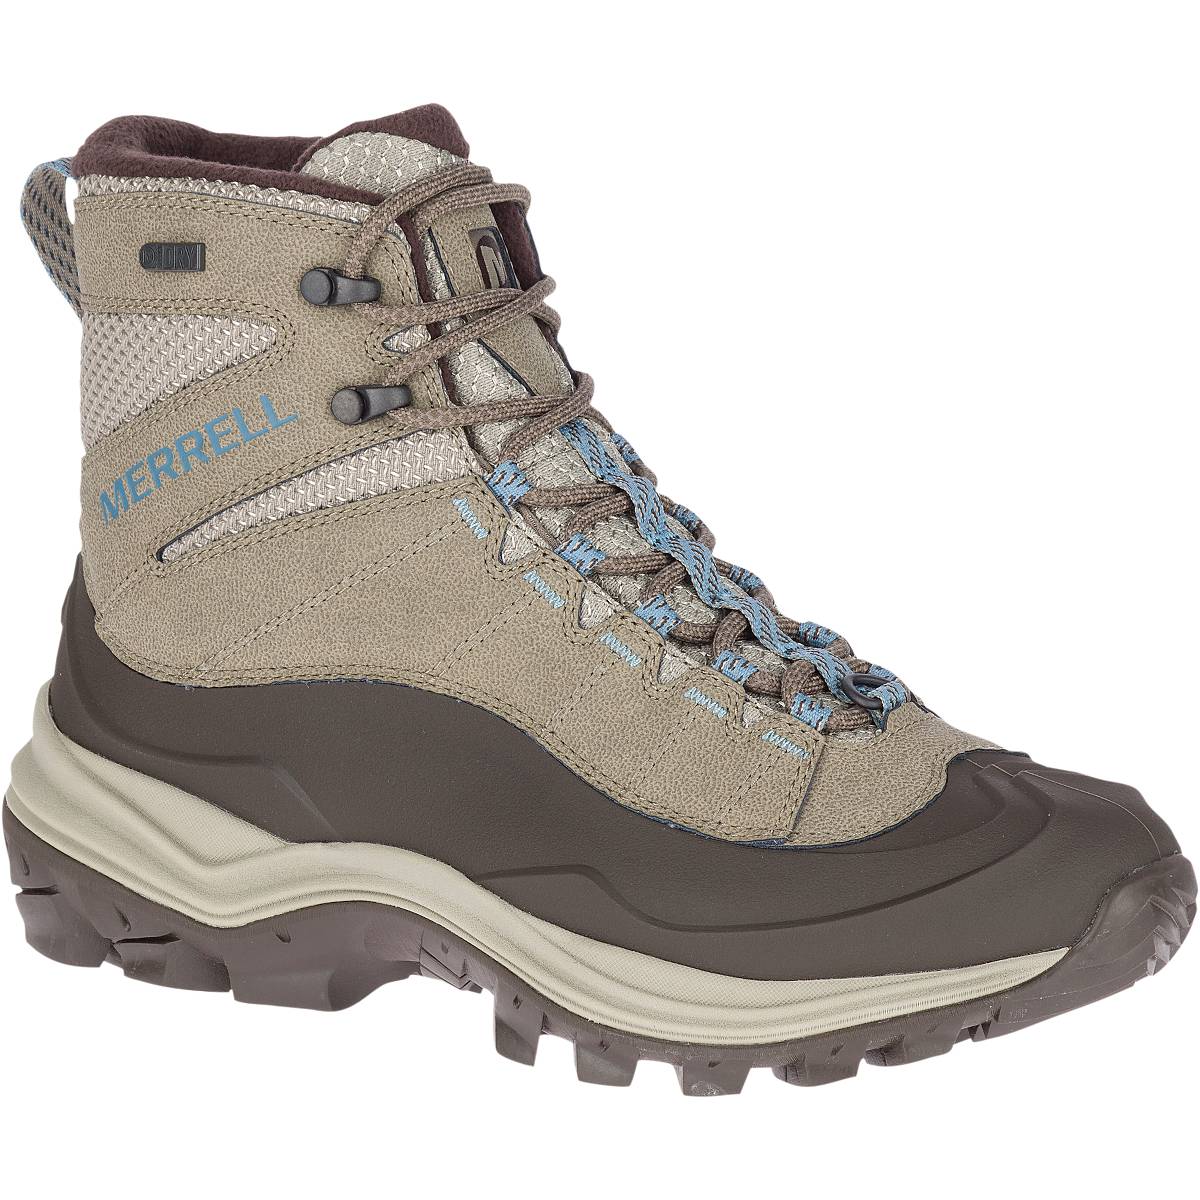 Merrell Thermo Chill Mid Shell Waterproof - Dámske Zimné Topánky - Hnede (SK-16821)